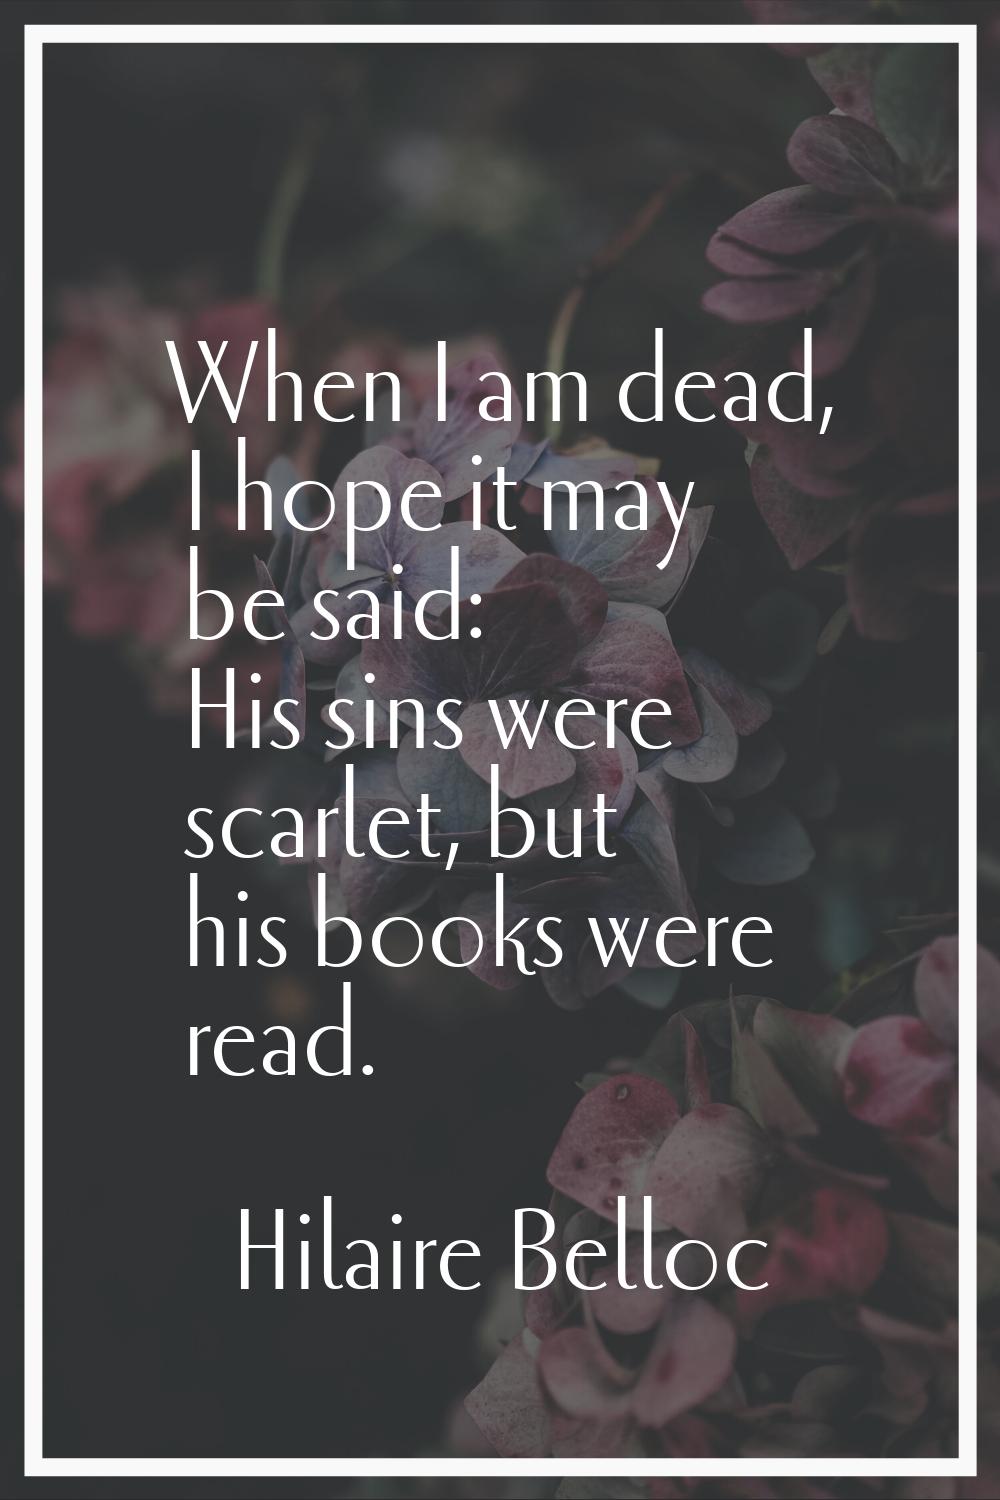 When I am dead, I hope it may be said: His sins were scarlet, but his books were read.